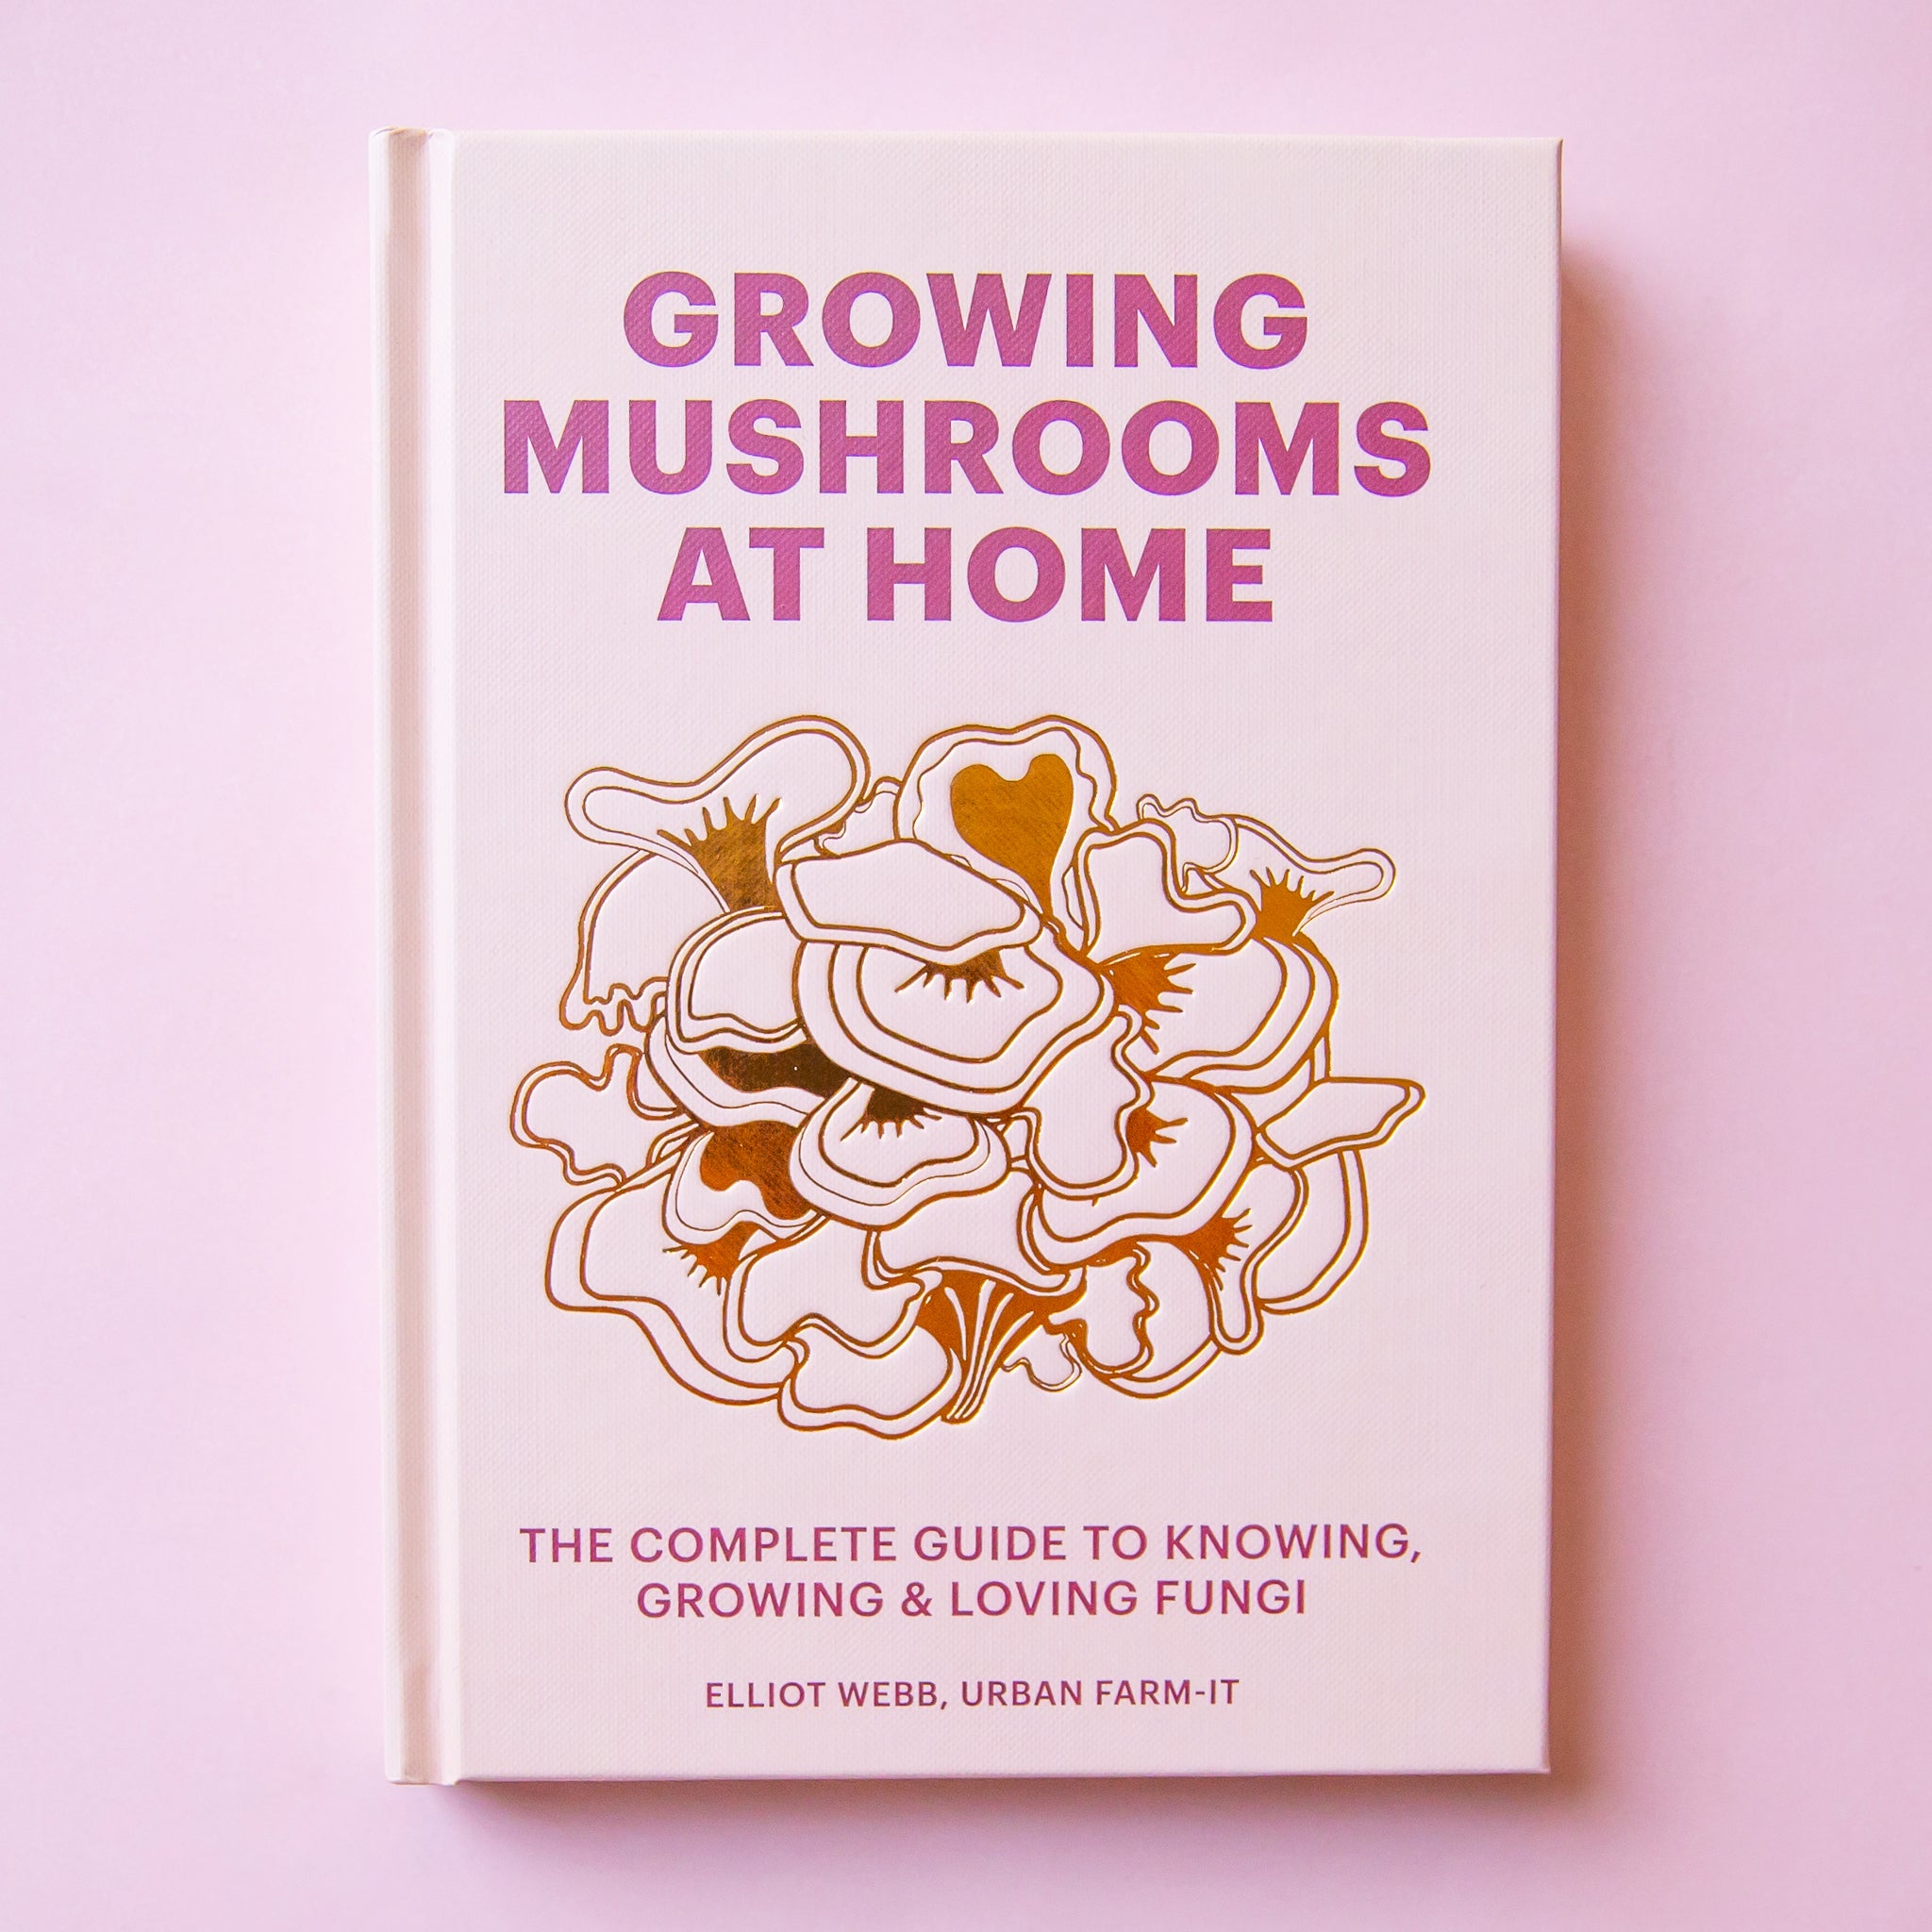 On a light purple background is a book cover with purple title that reads, &quot;Growing Mushrooms At Home&quot; along with a graphic of mushrooms in the center. 